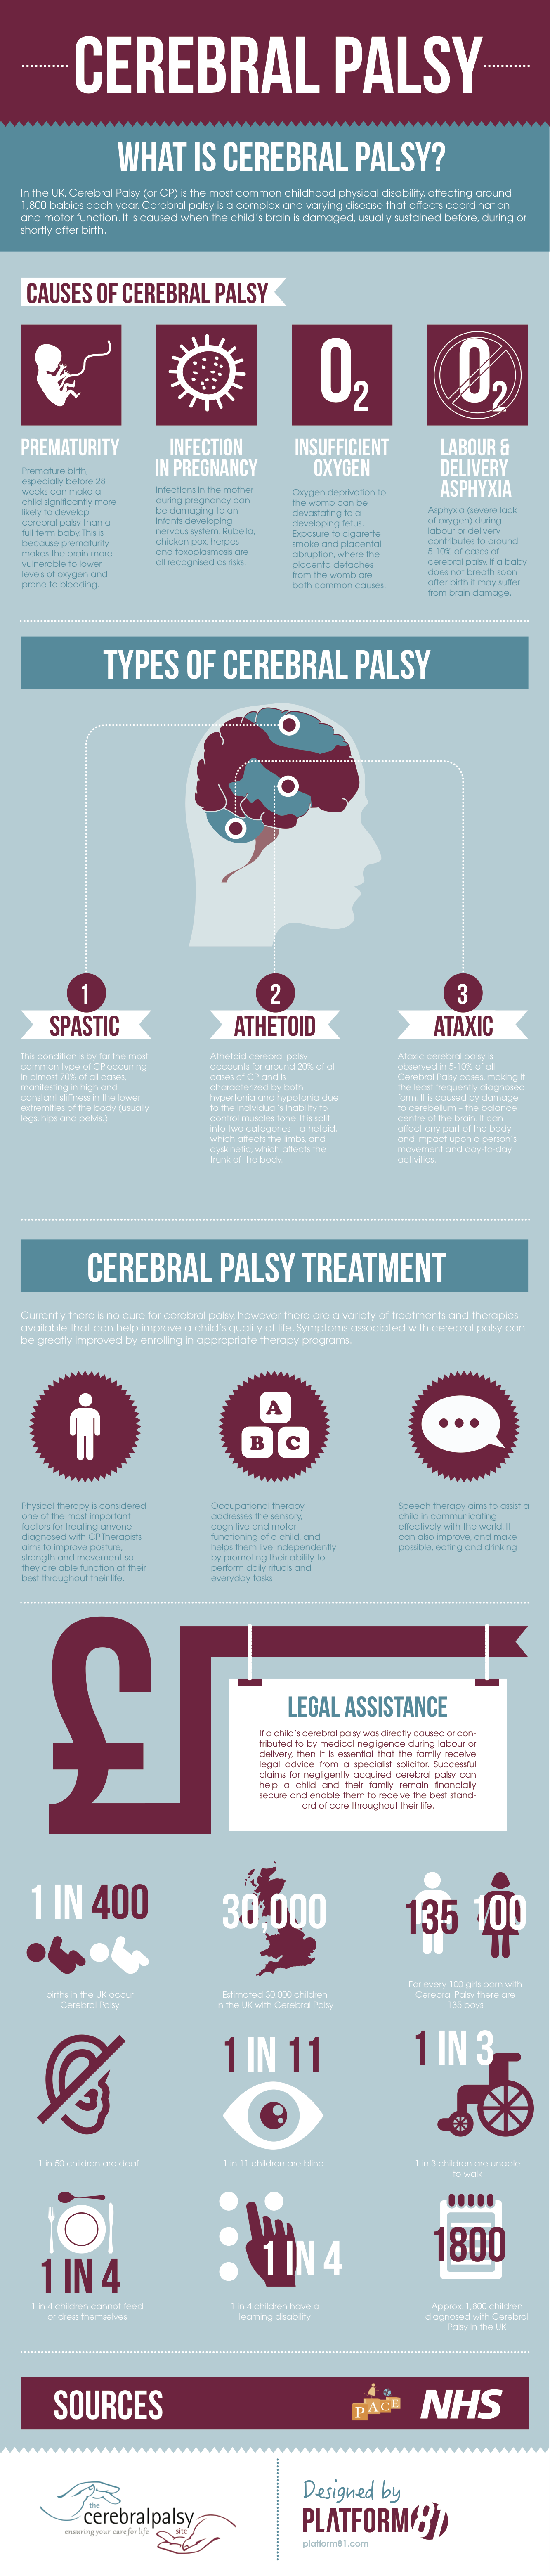 Cerebral Palsy - Facts & Figures